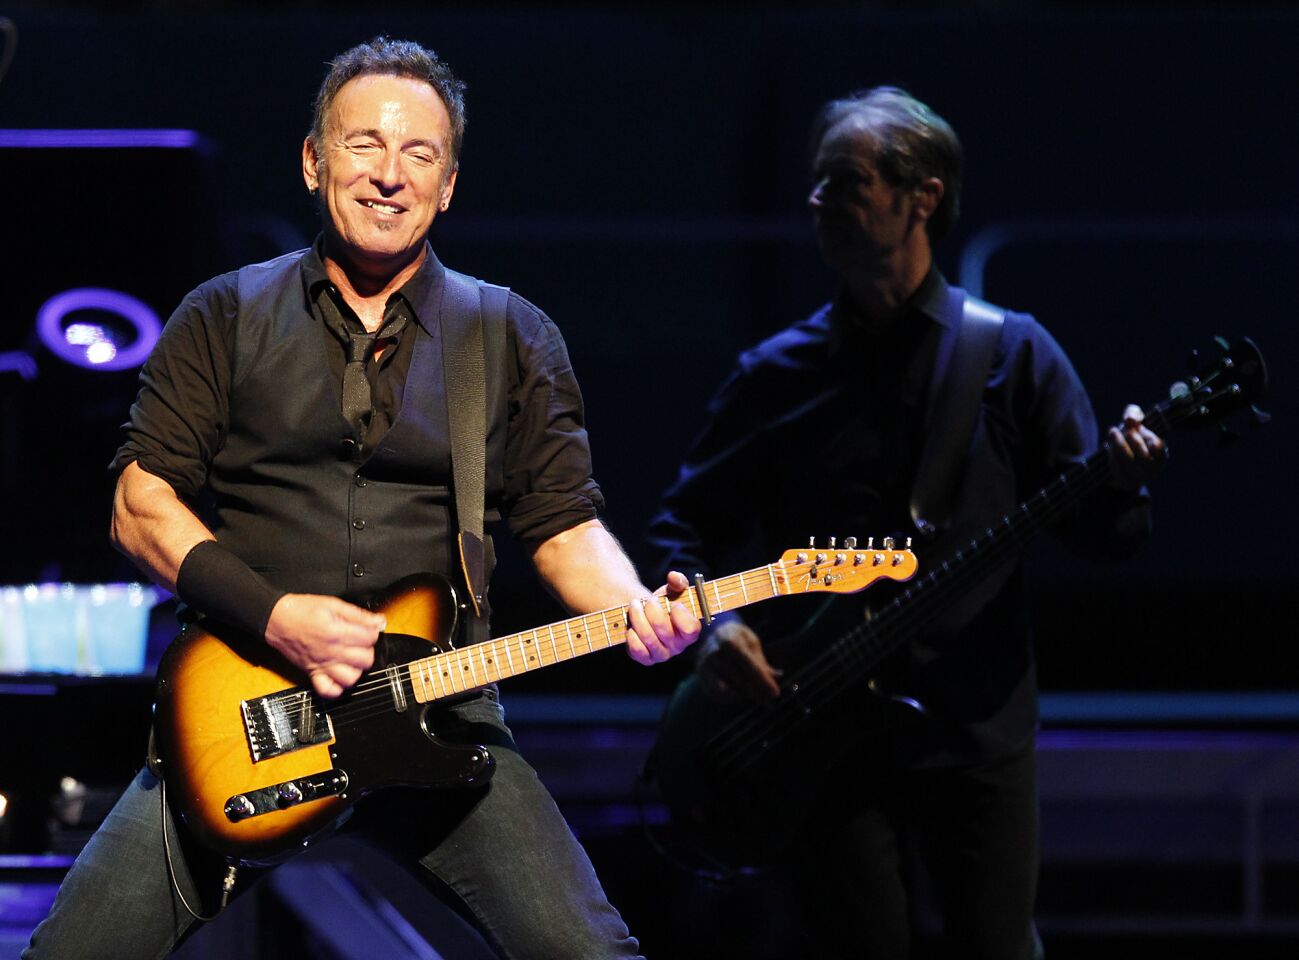 Bruce Springsteen and the E Street Band perform at the L.A. Sports Arena on April 26, 2012.